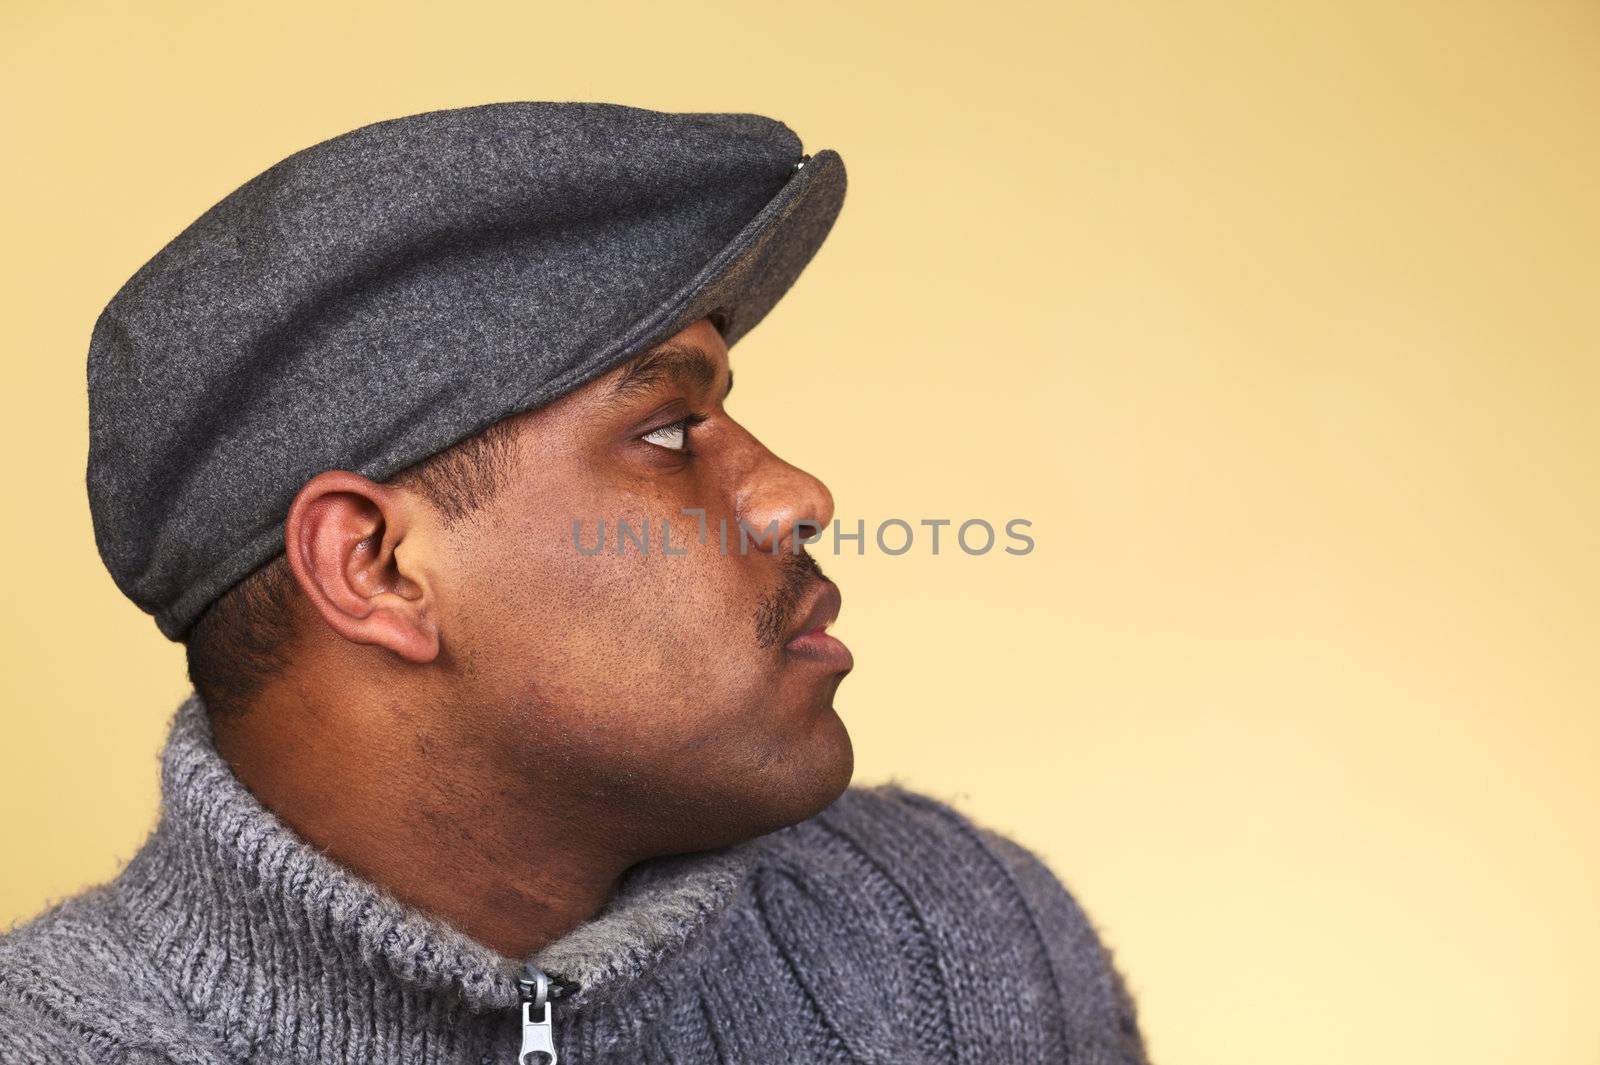 Portrait of a Young Man with a Cap by ildi